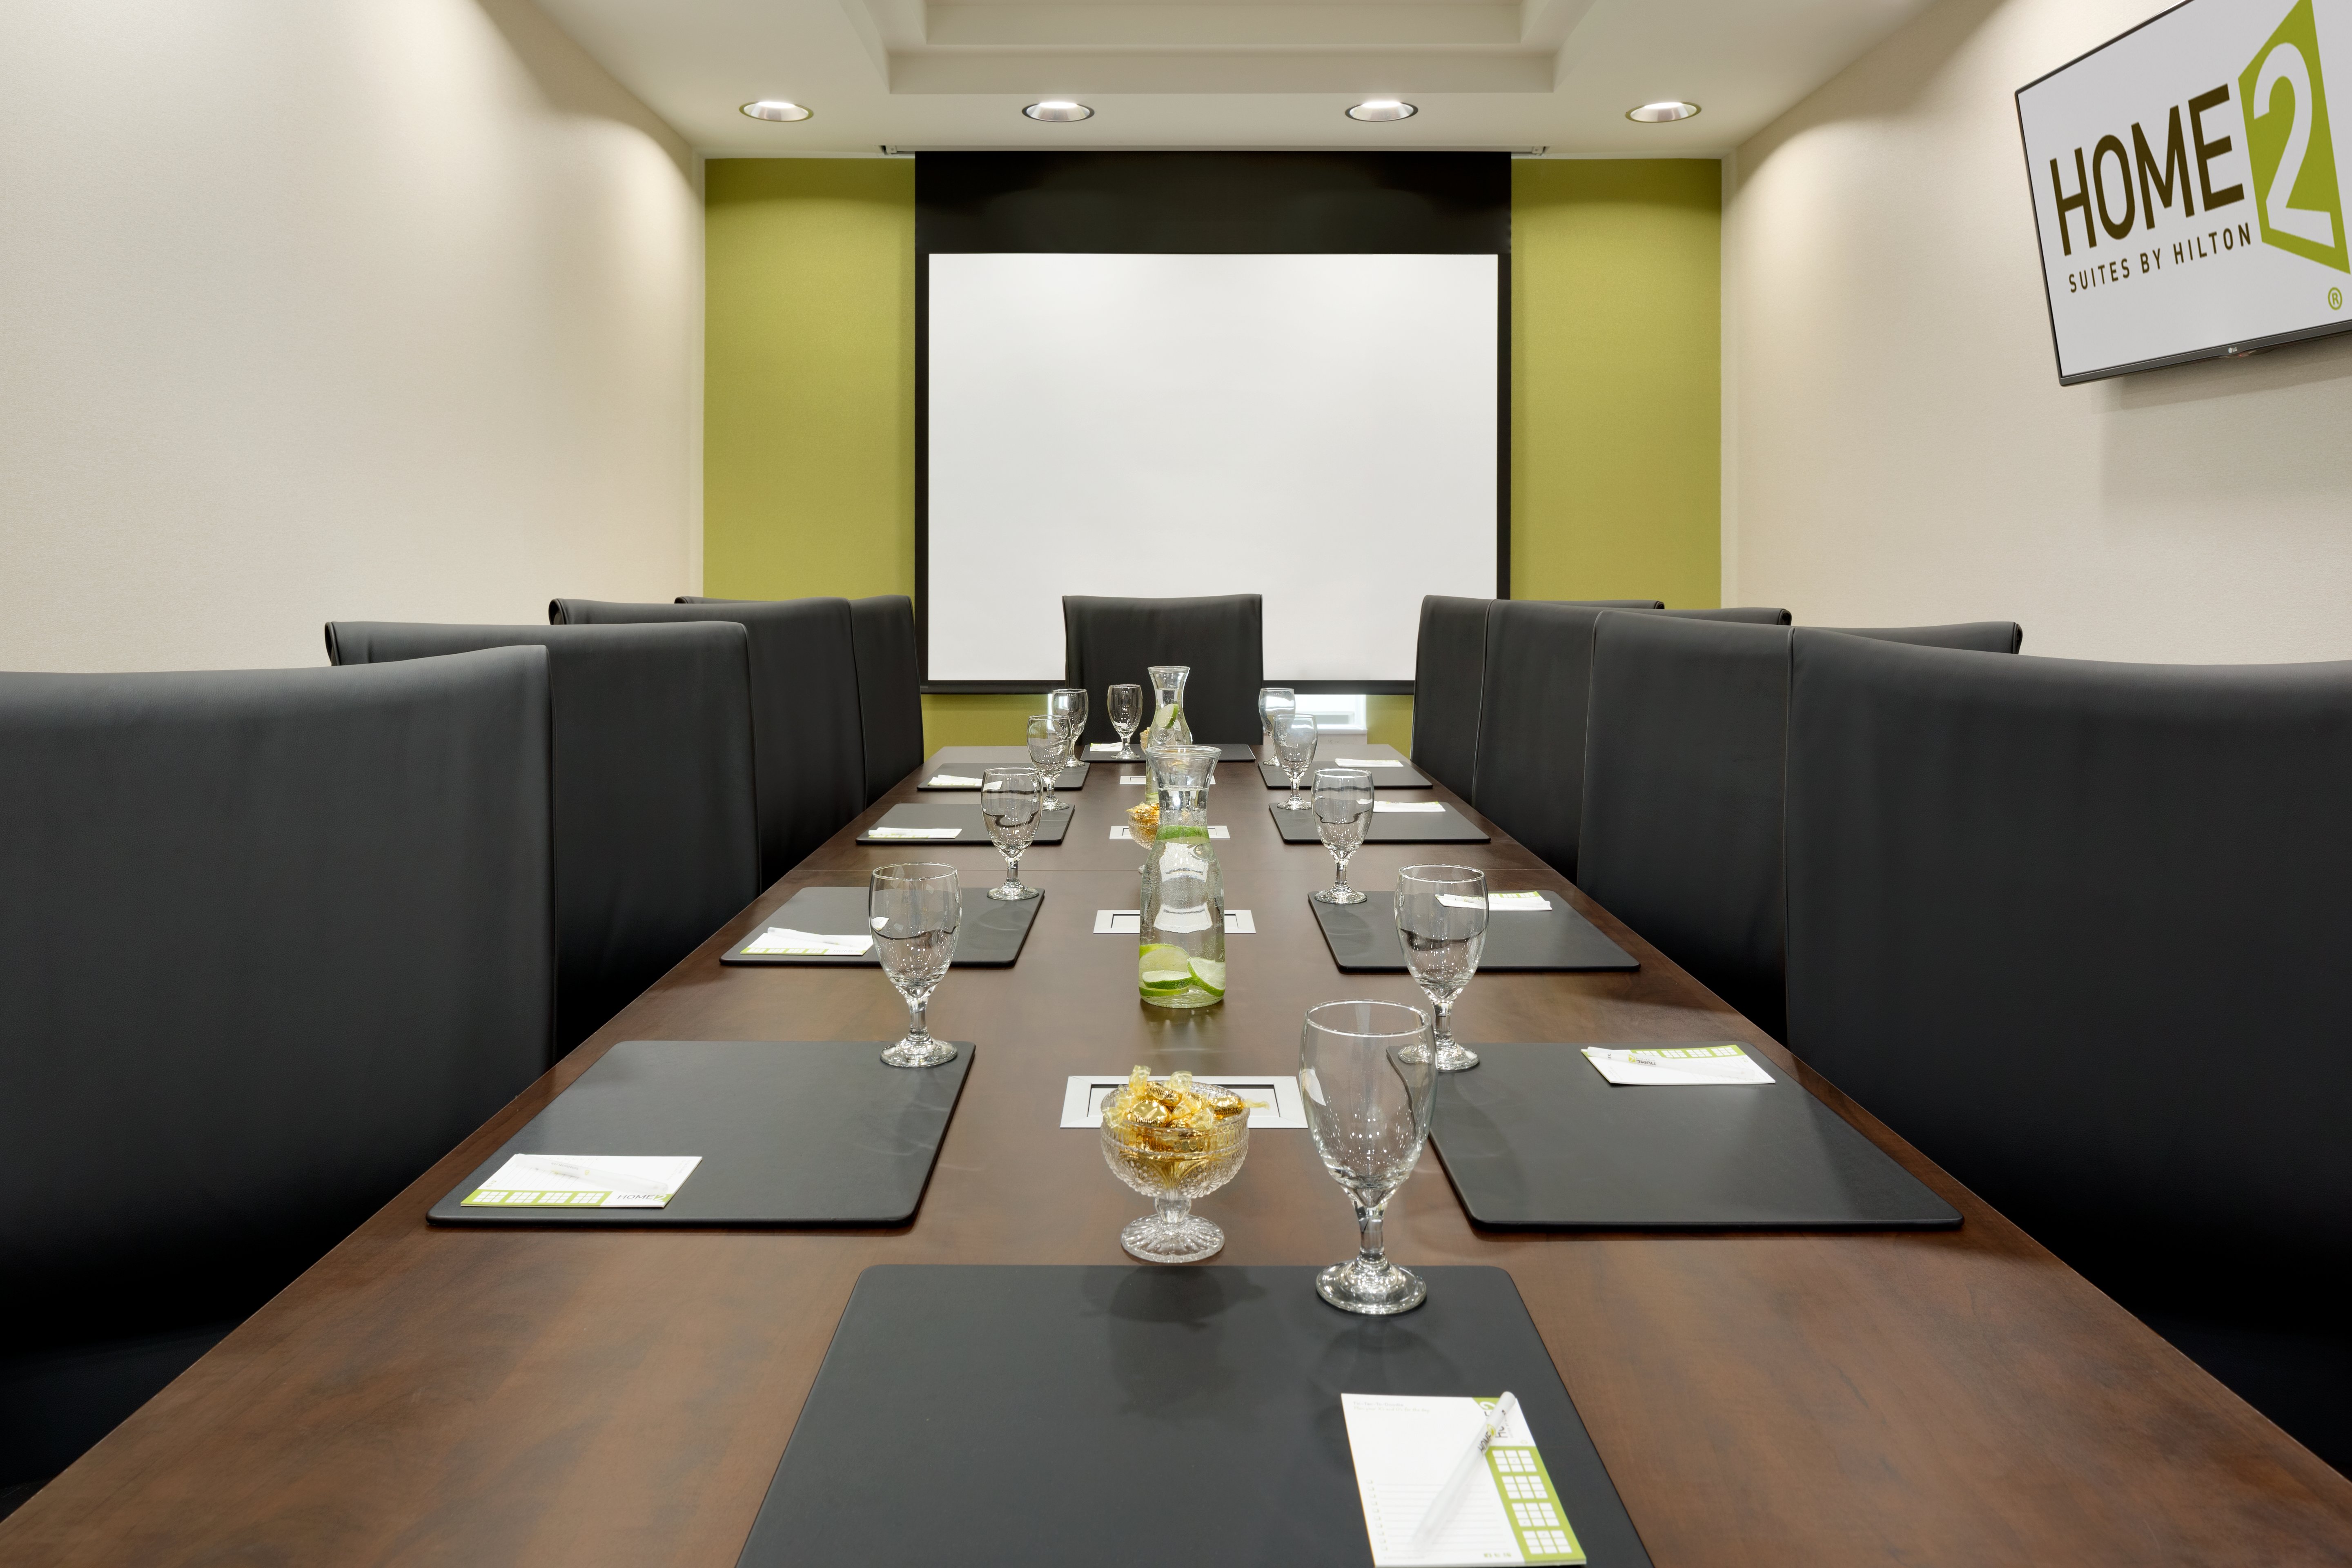 Black Chairs Around Boardroom Table With Presentation Screen on Green Wall and TV